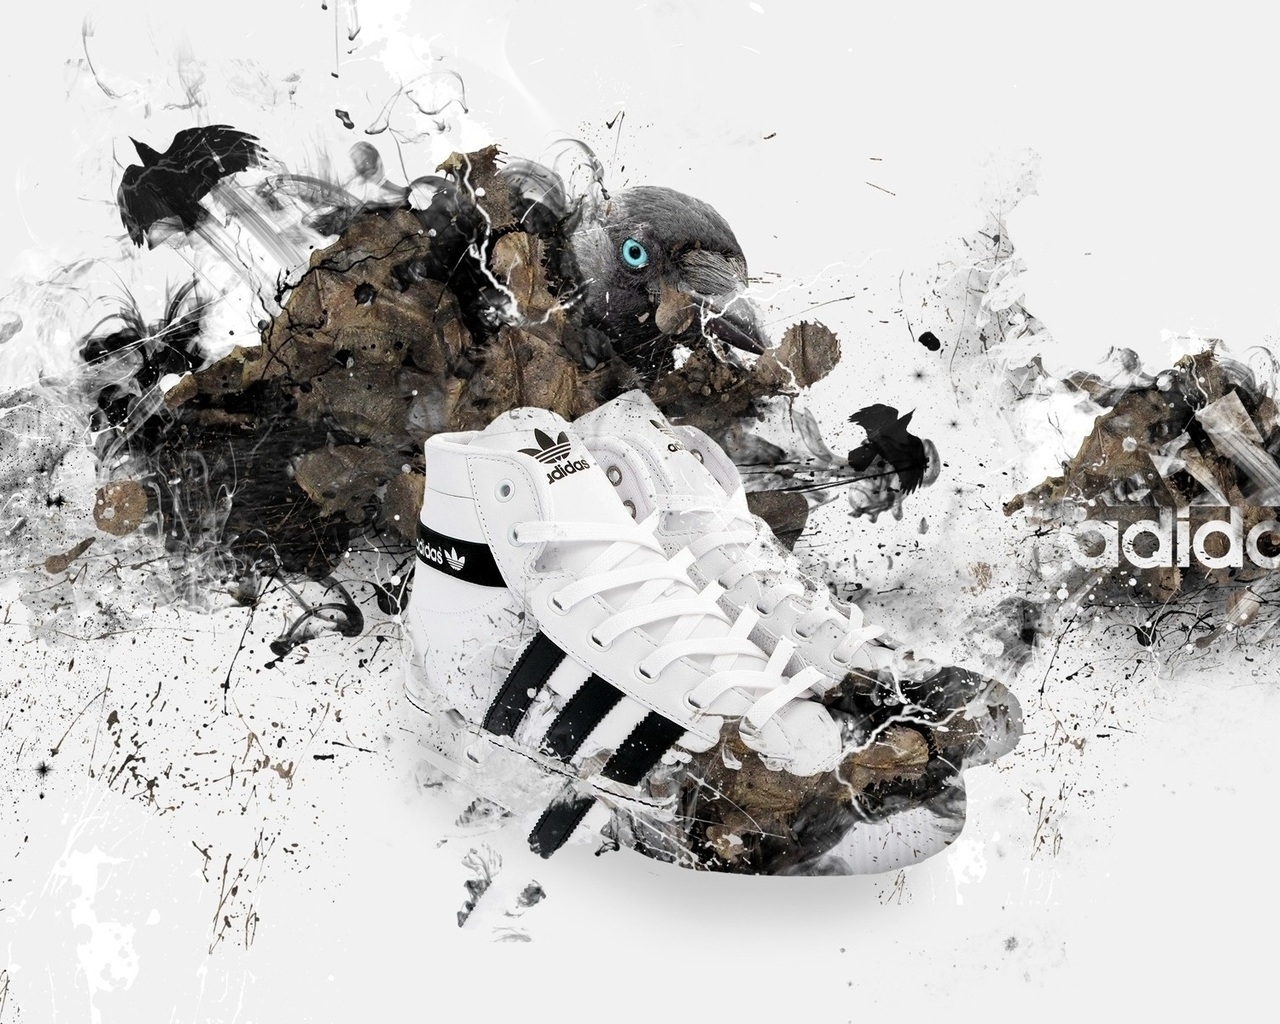 Adidas Shoes for 1280 x 1024 resolution